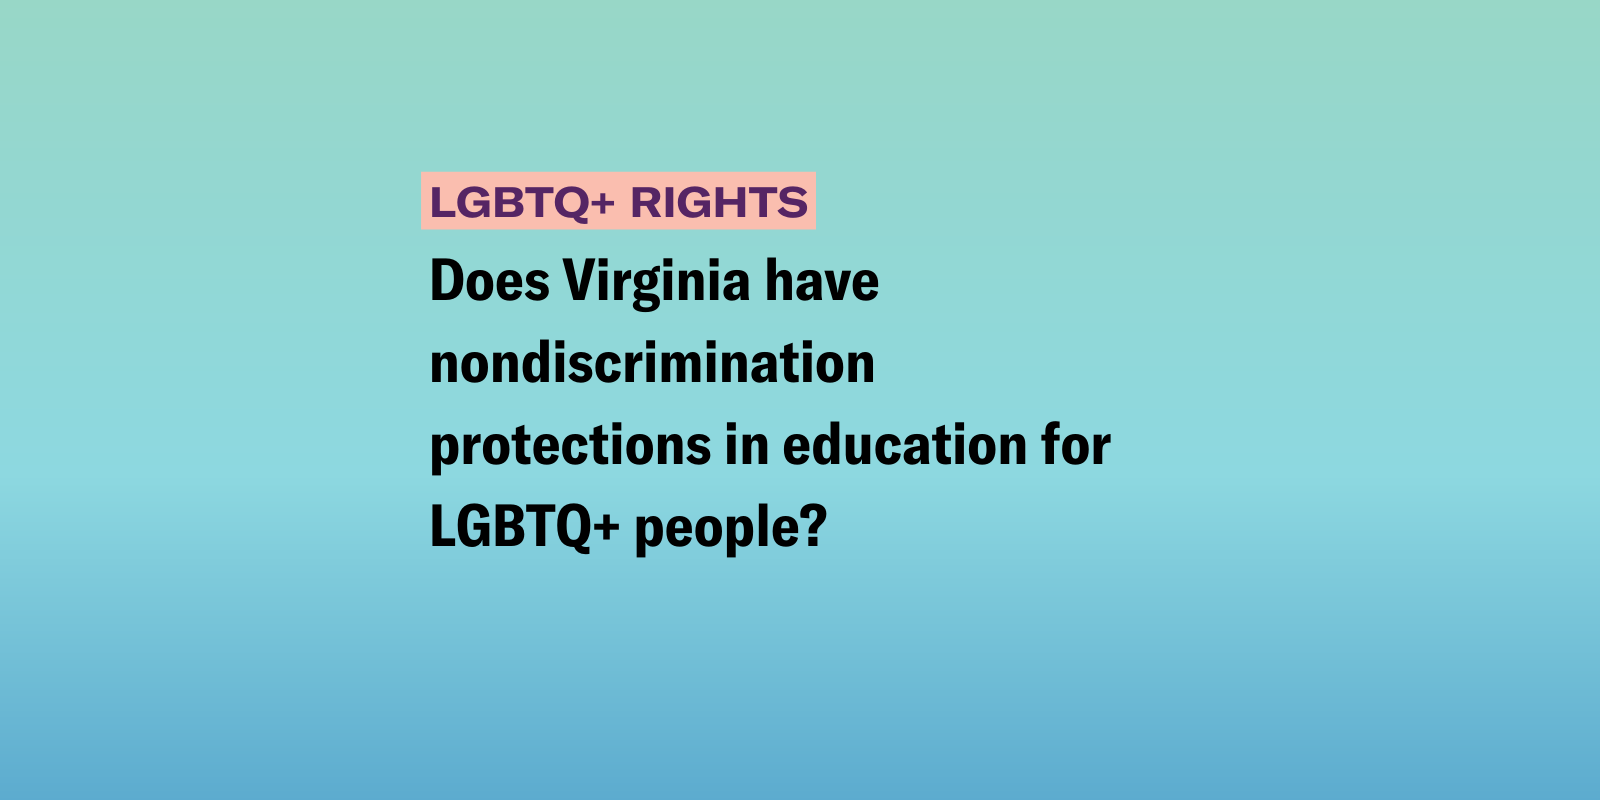 Does Virginia have nondiscrimination protections in education for LGBTQ+ people? 